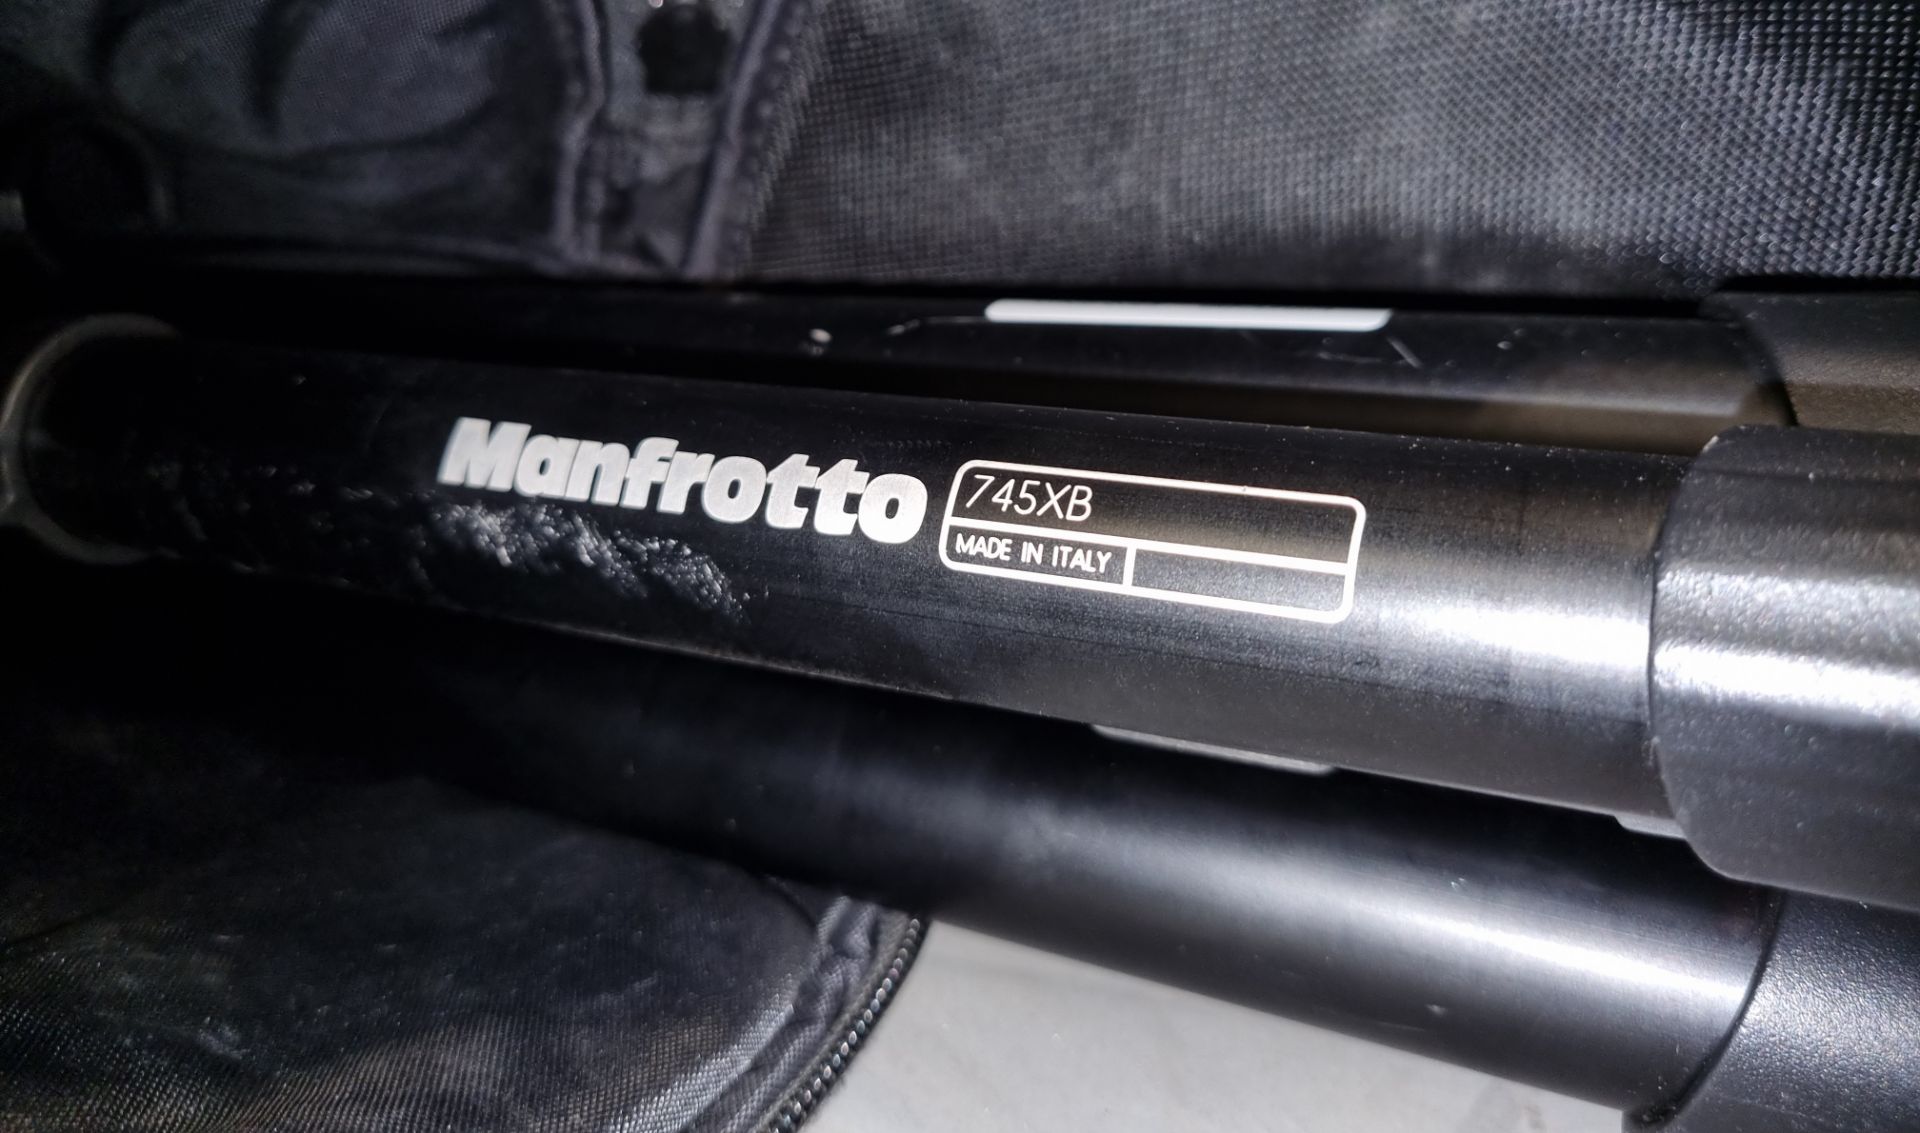 Manfrotto 501HDV head unit on a 745XB tripod with carry case - Image 3 of 8